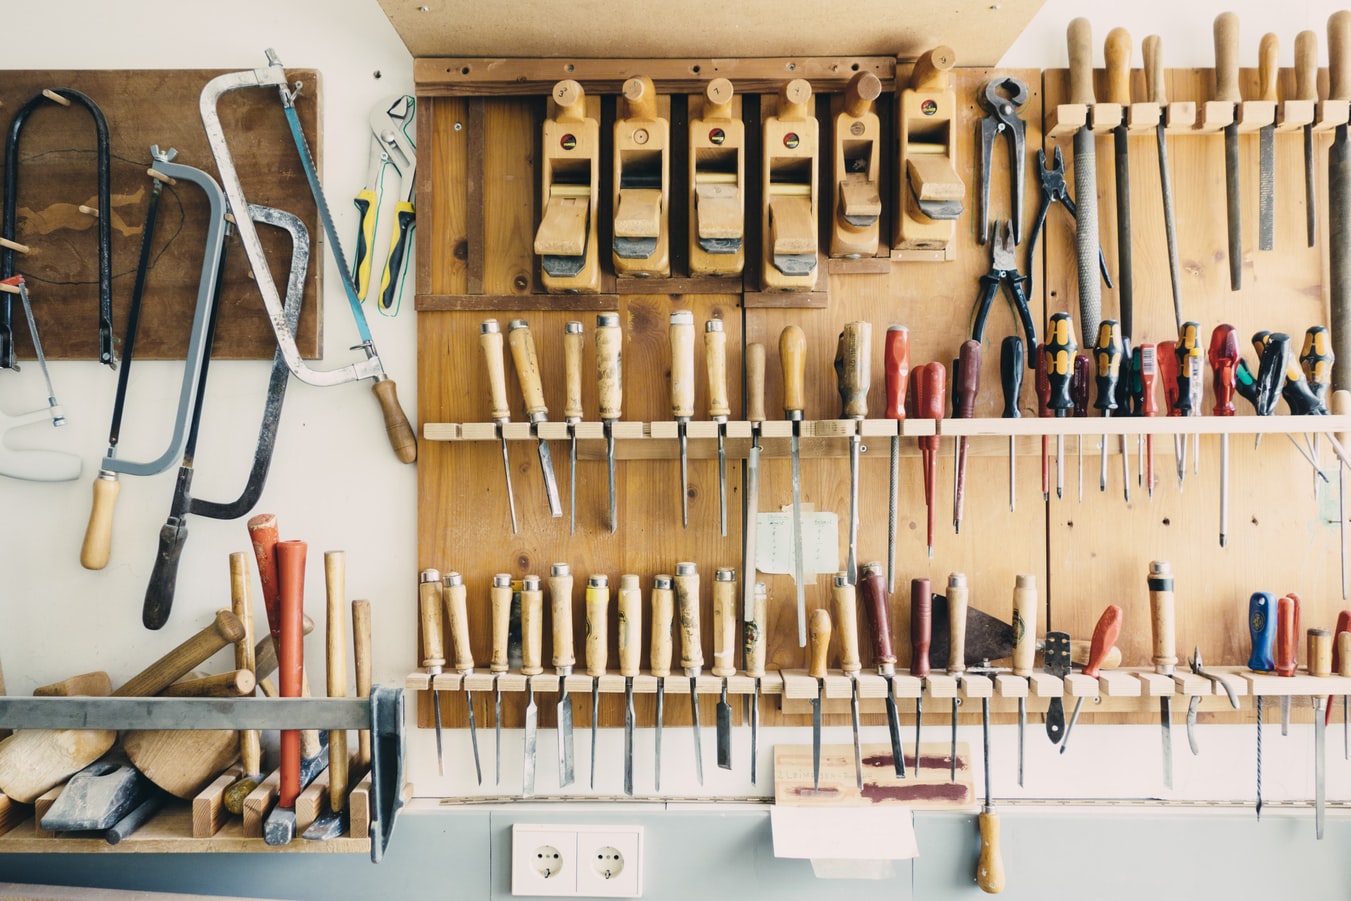 Tools You Need to Build a Shop for Knife Making